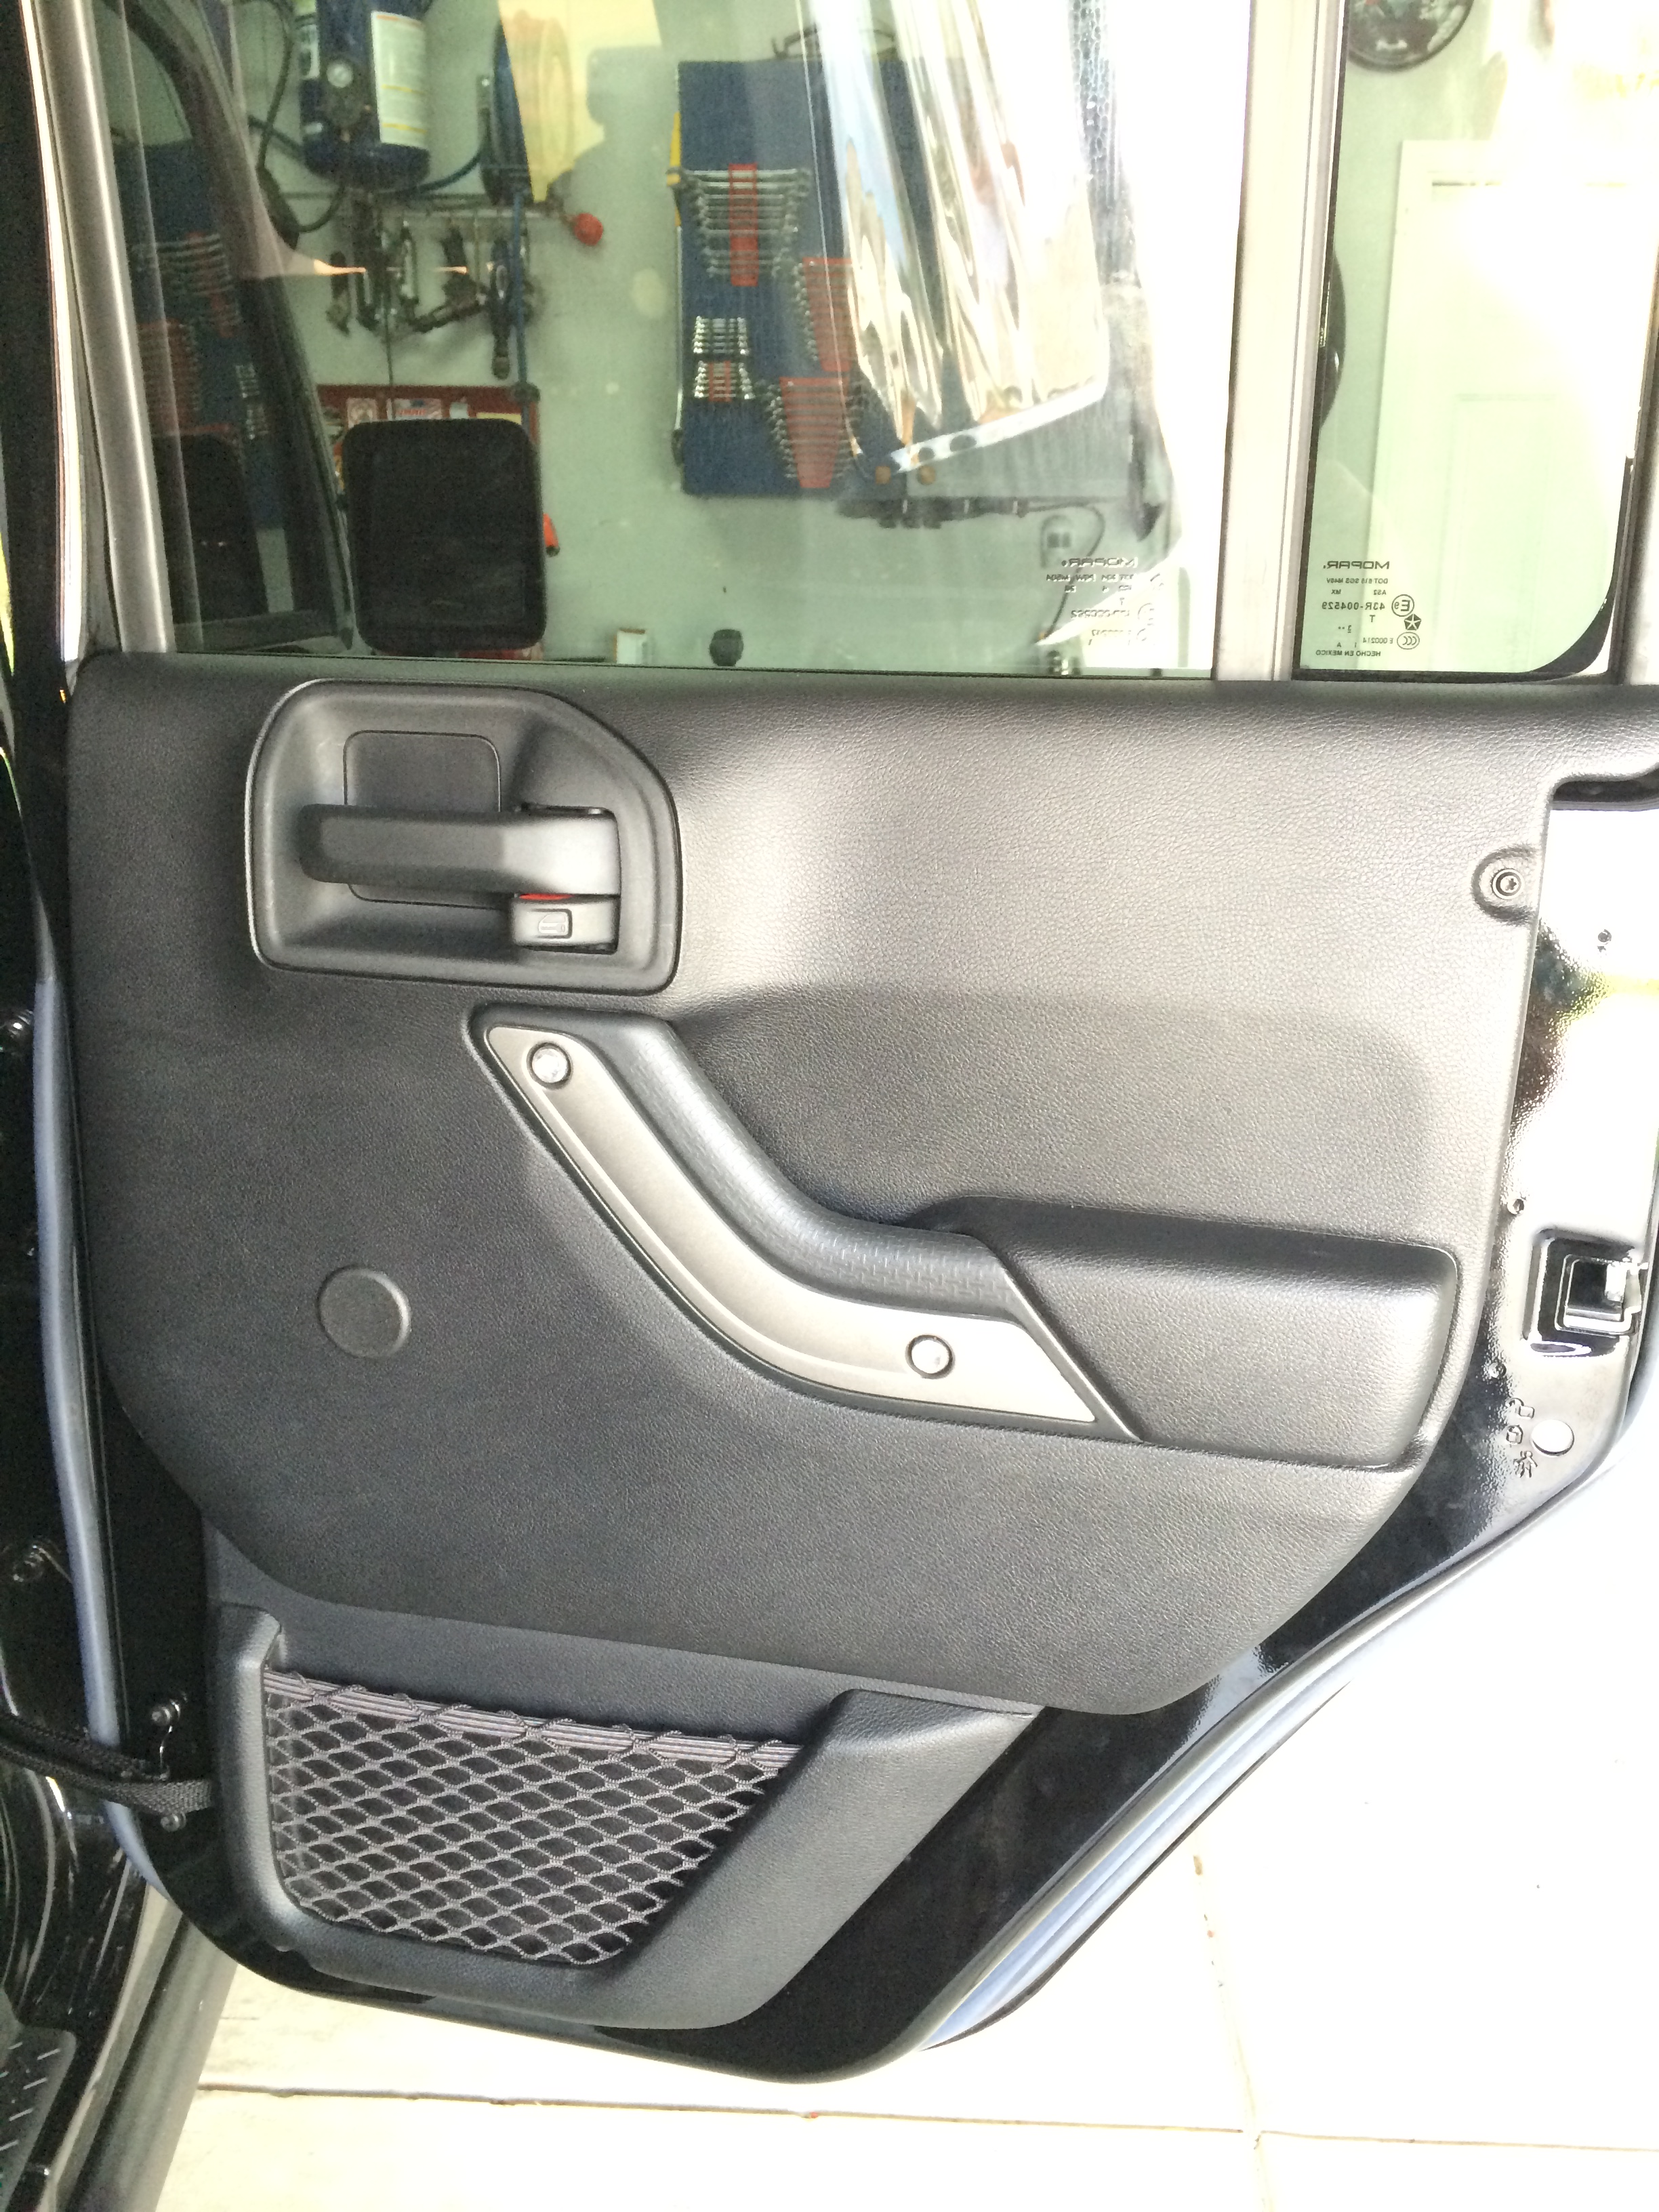 Power Window Install using Factory Switches and Bezels  - The  top destination for Jeep JK and JL Wrangler news, rumors, and discussion